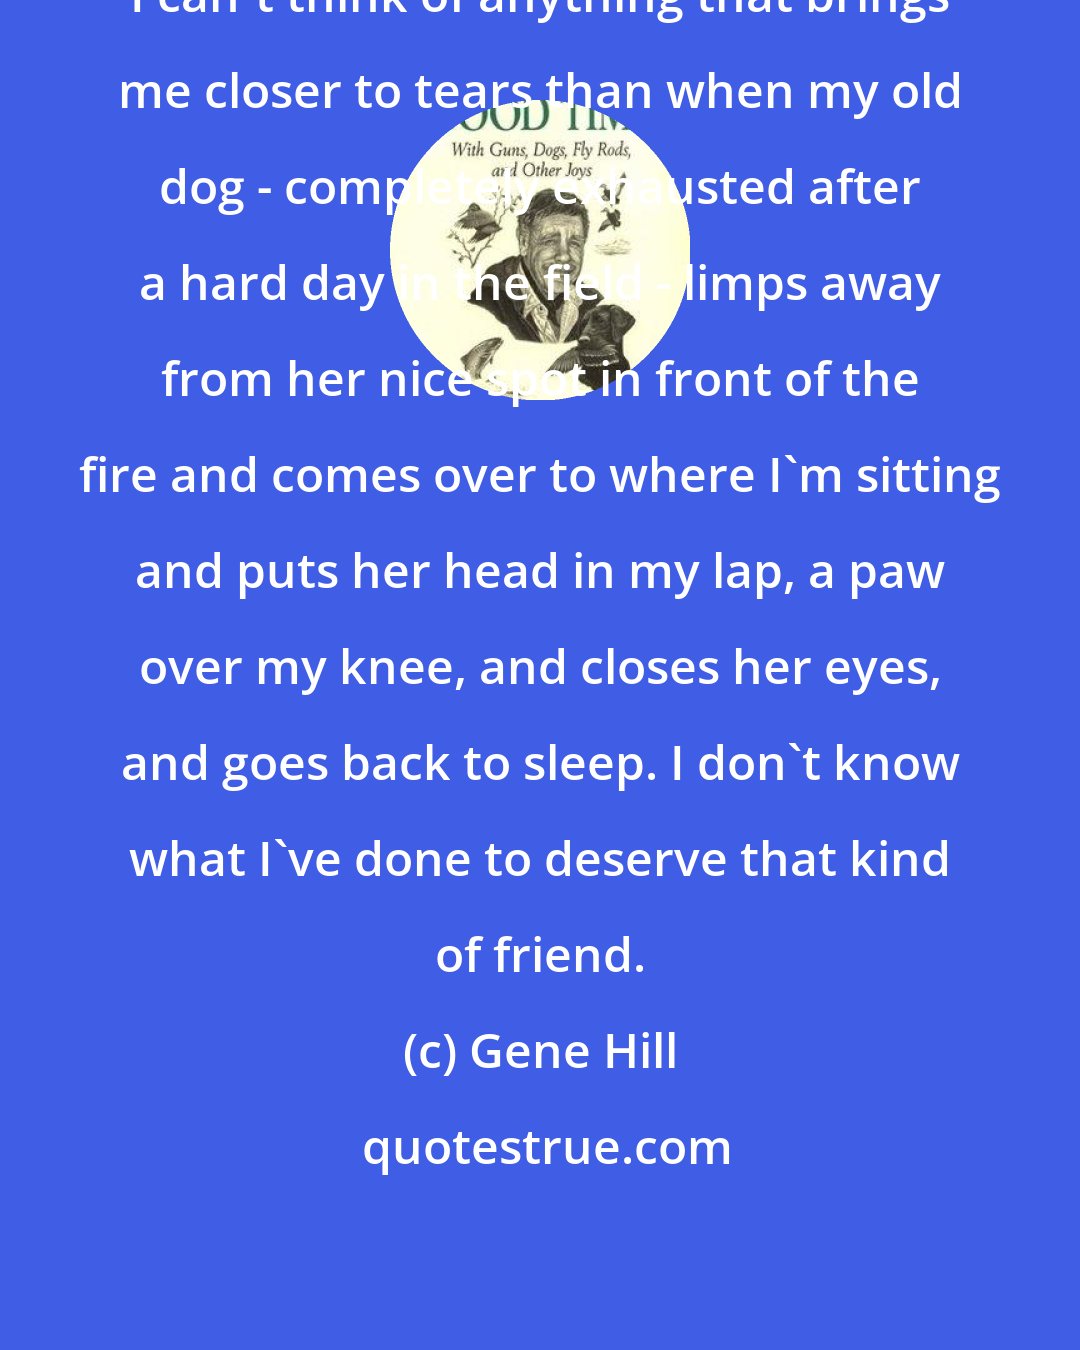 Gene Hill: I can't think of anything that brings me closer to tears than when my old dog - completely exhausted after a hard day in the field - limps away from her nice spot in front of the fire and comes over to where I'm sitting and puts her head in my lap, a paw over my knee, and closes her eyes, and goes back to sleep. I don't know what I've done to deserve that kind of friend.